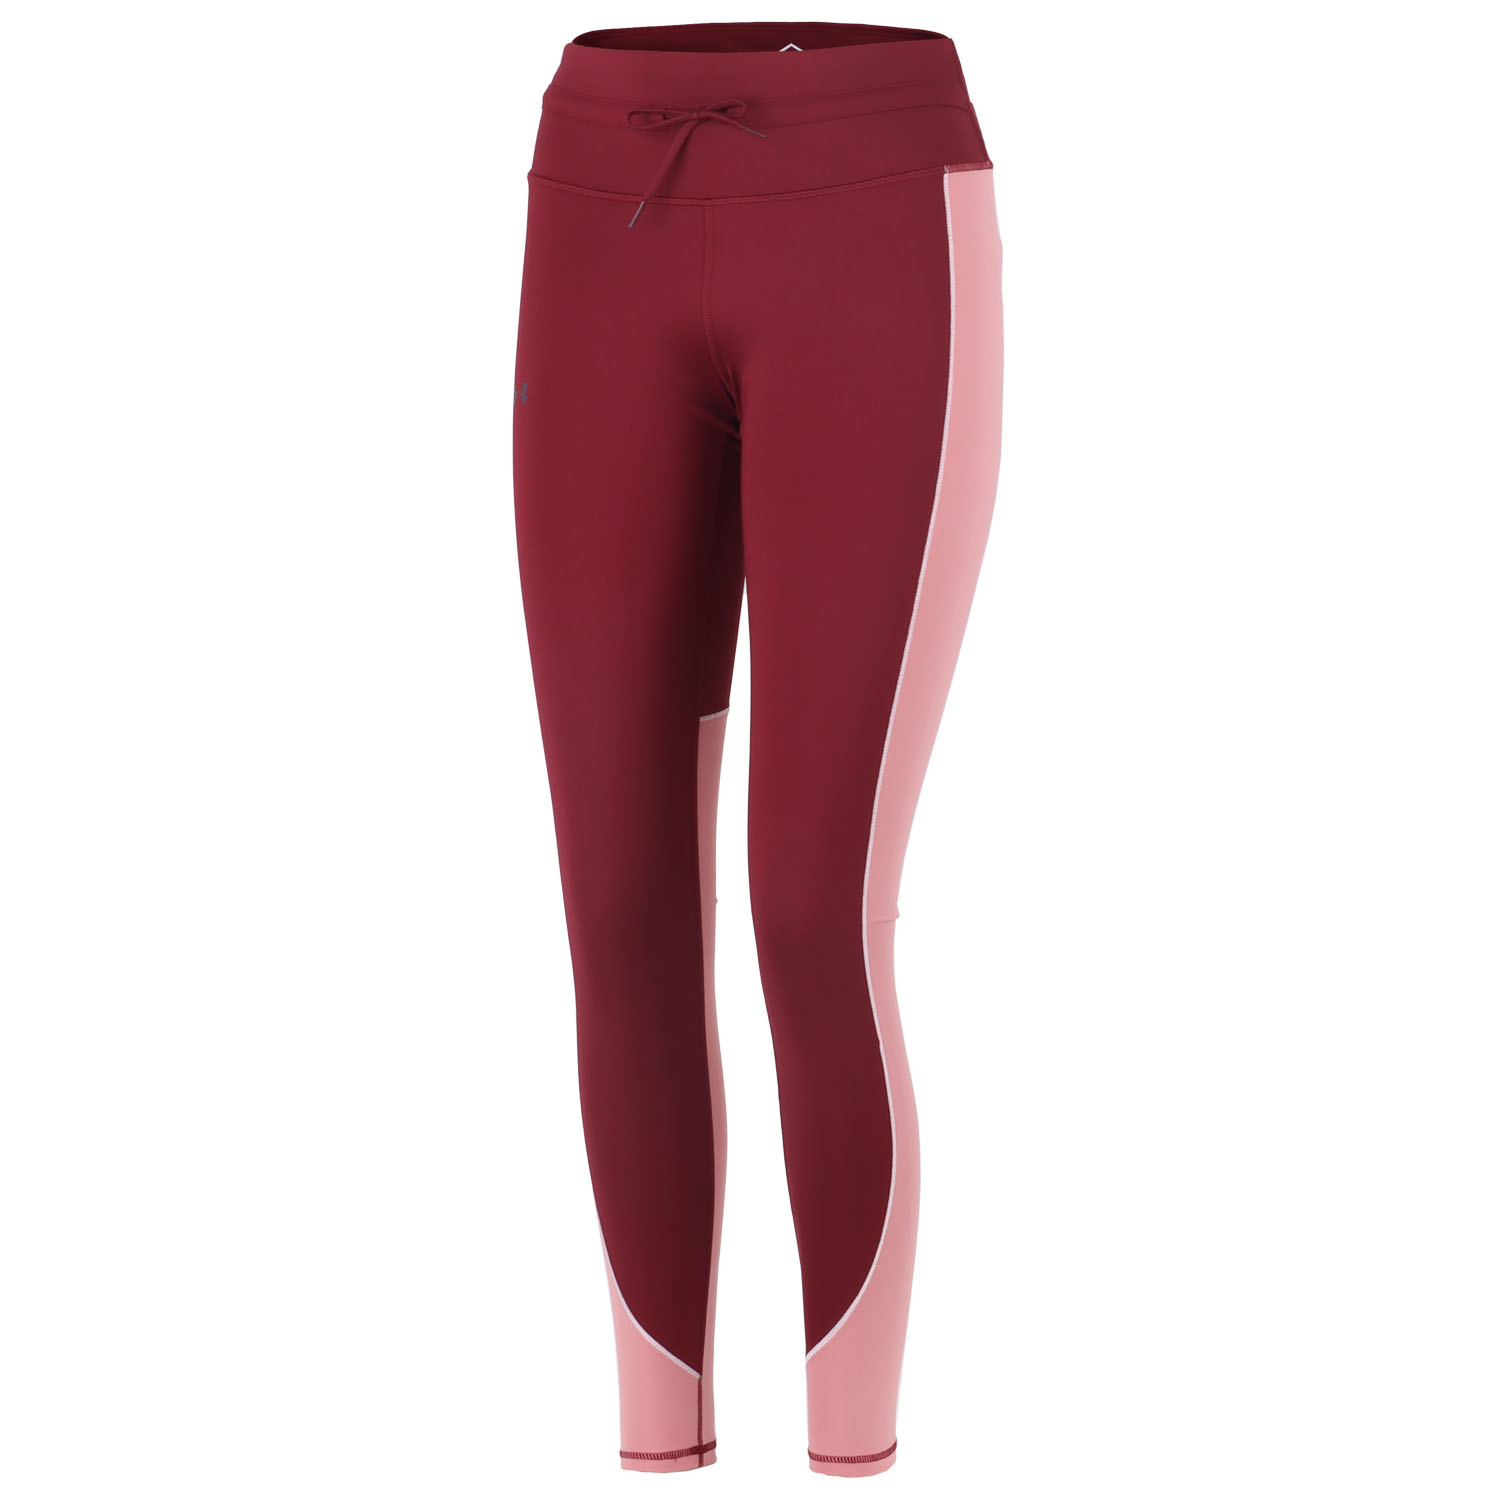 Image of Under Armour Women's UA RUSH™ Cozy Leggings - League Red/Micro Pink